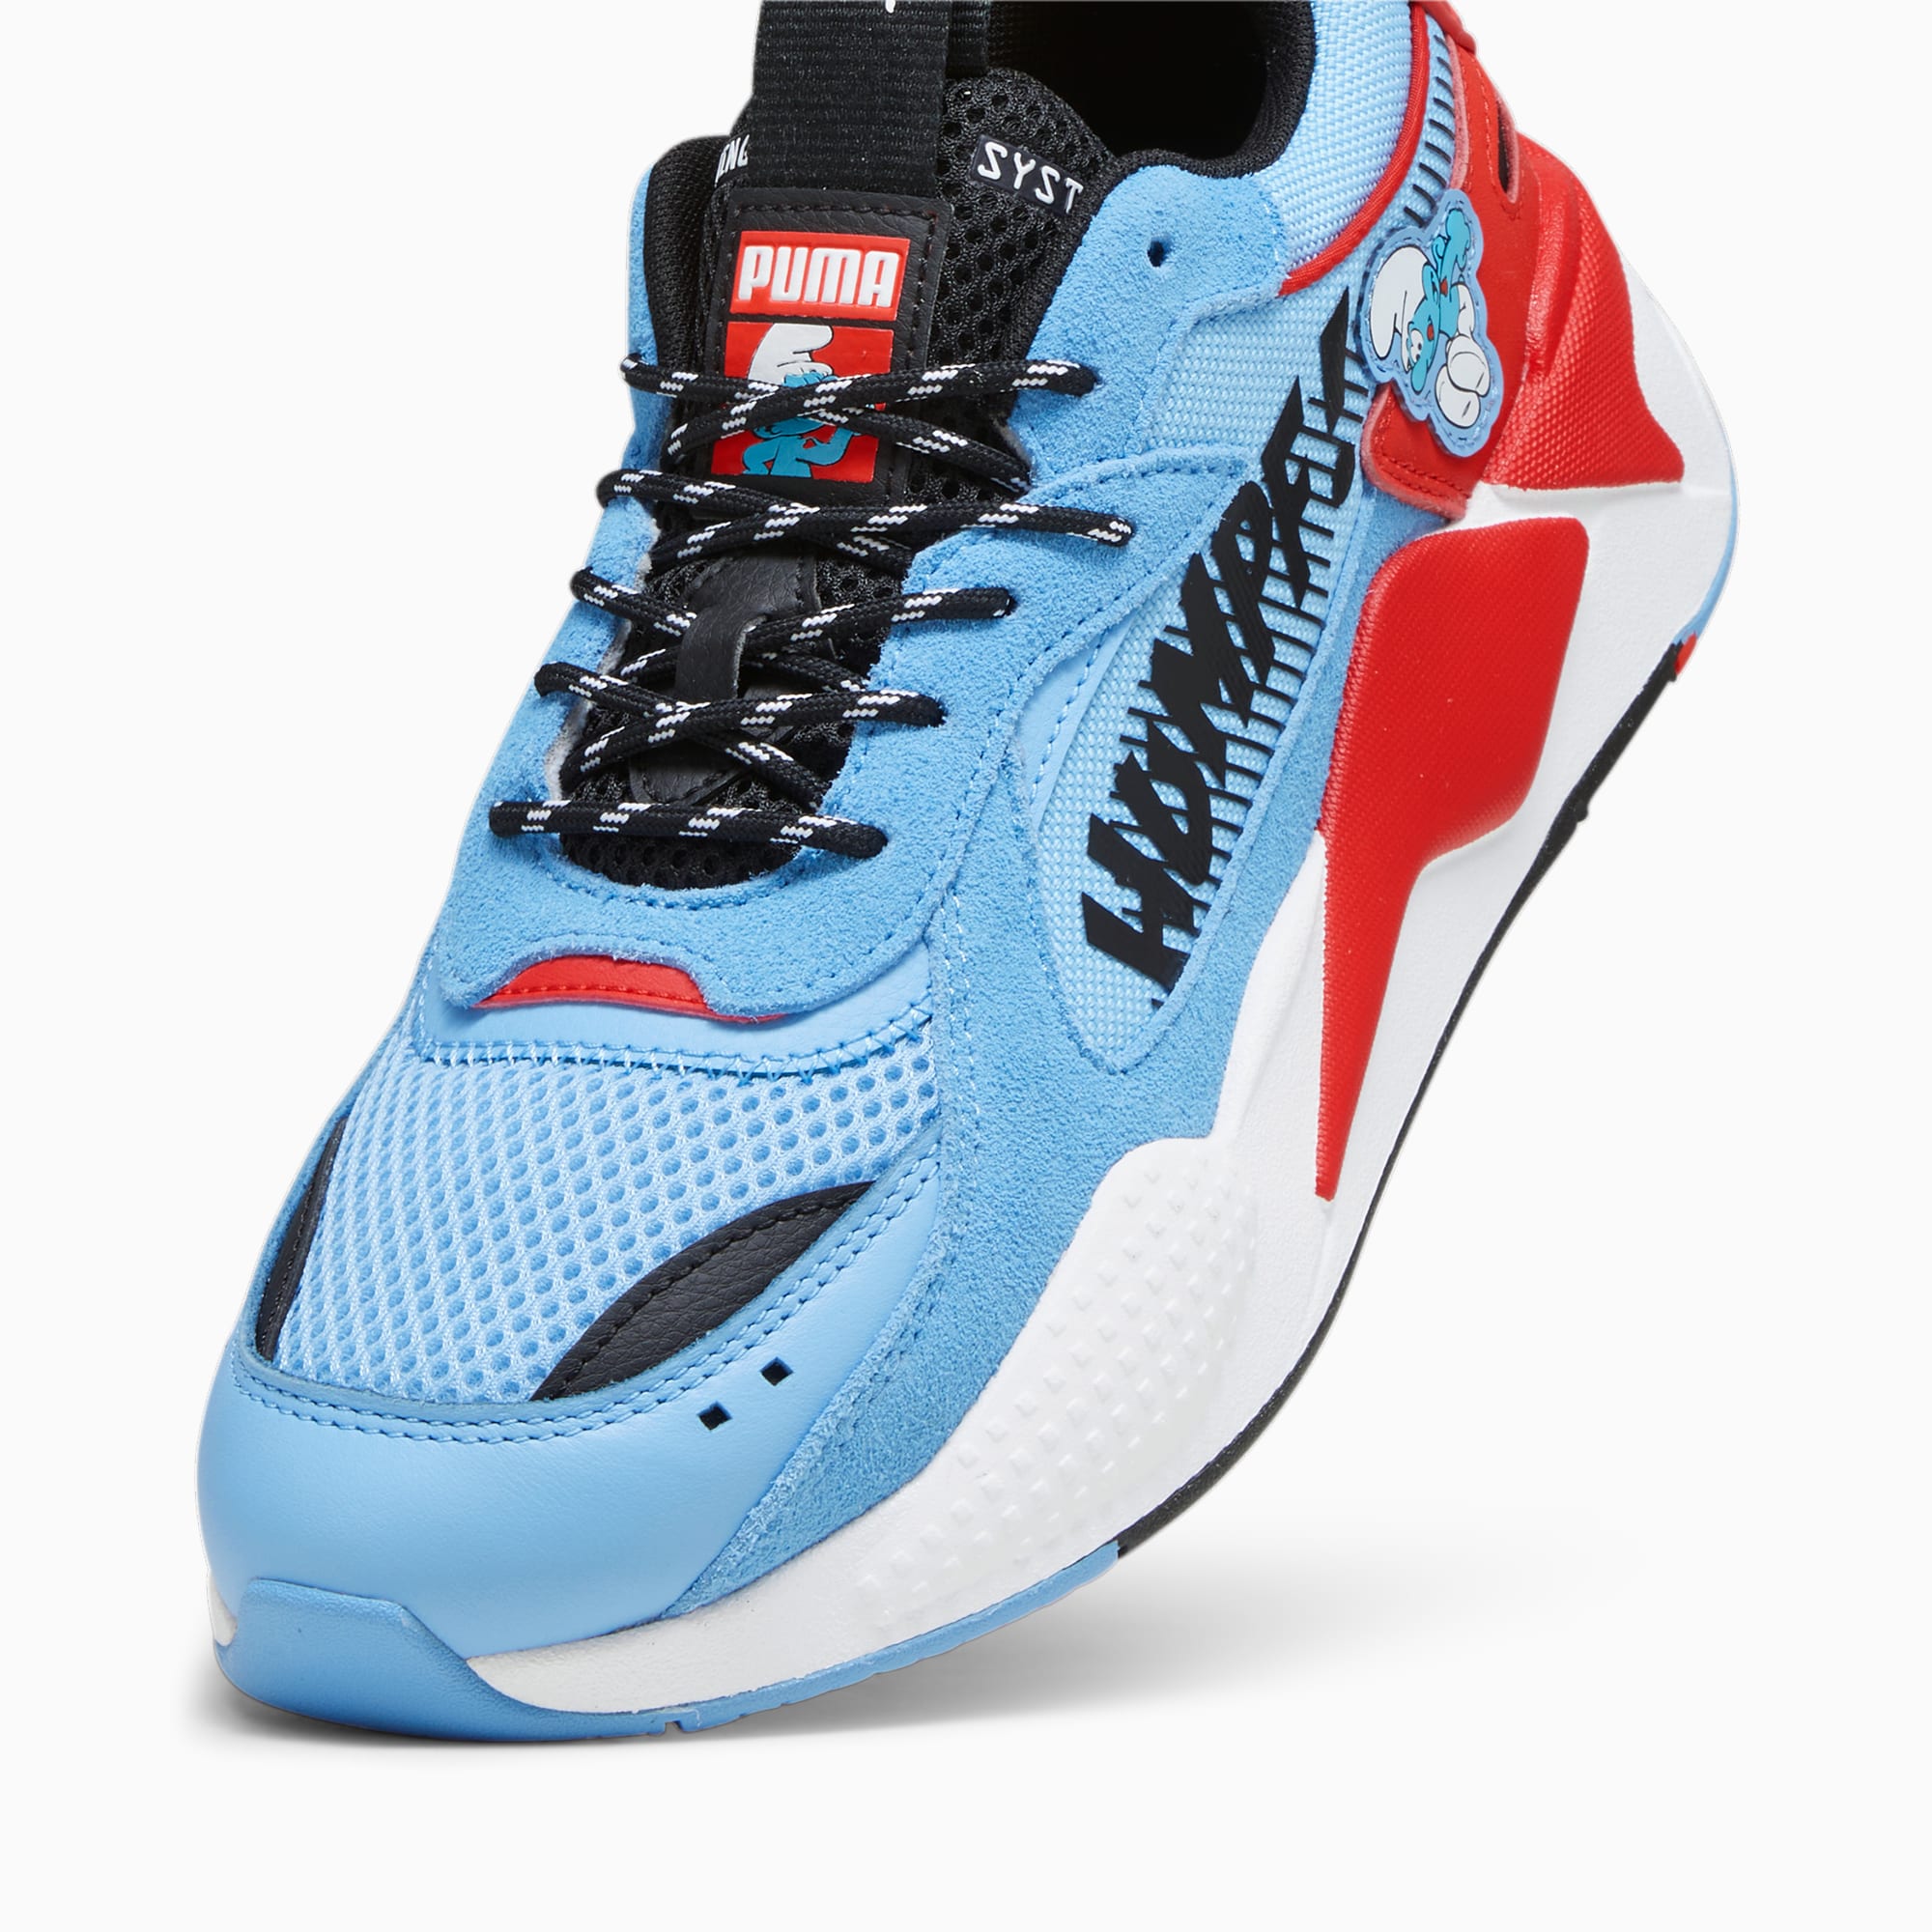 Women's PUMA X The Smurfs Rs-x Sneakers, Light Blue/Red, Size 35,5, Shoes